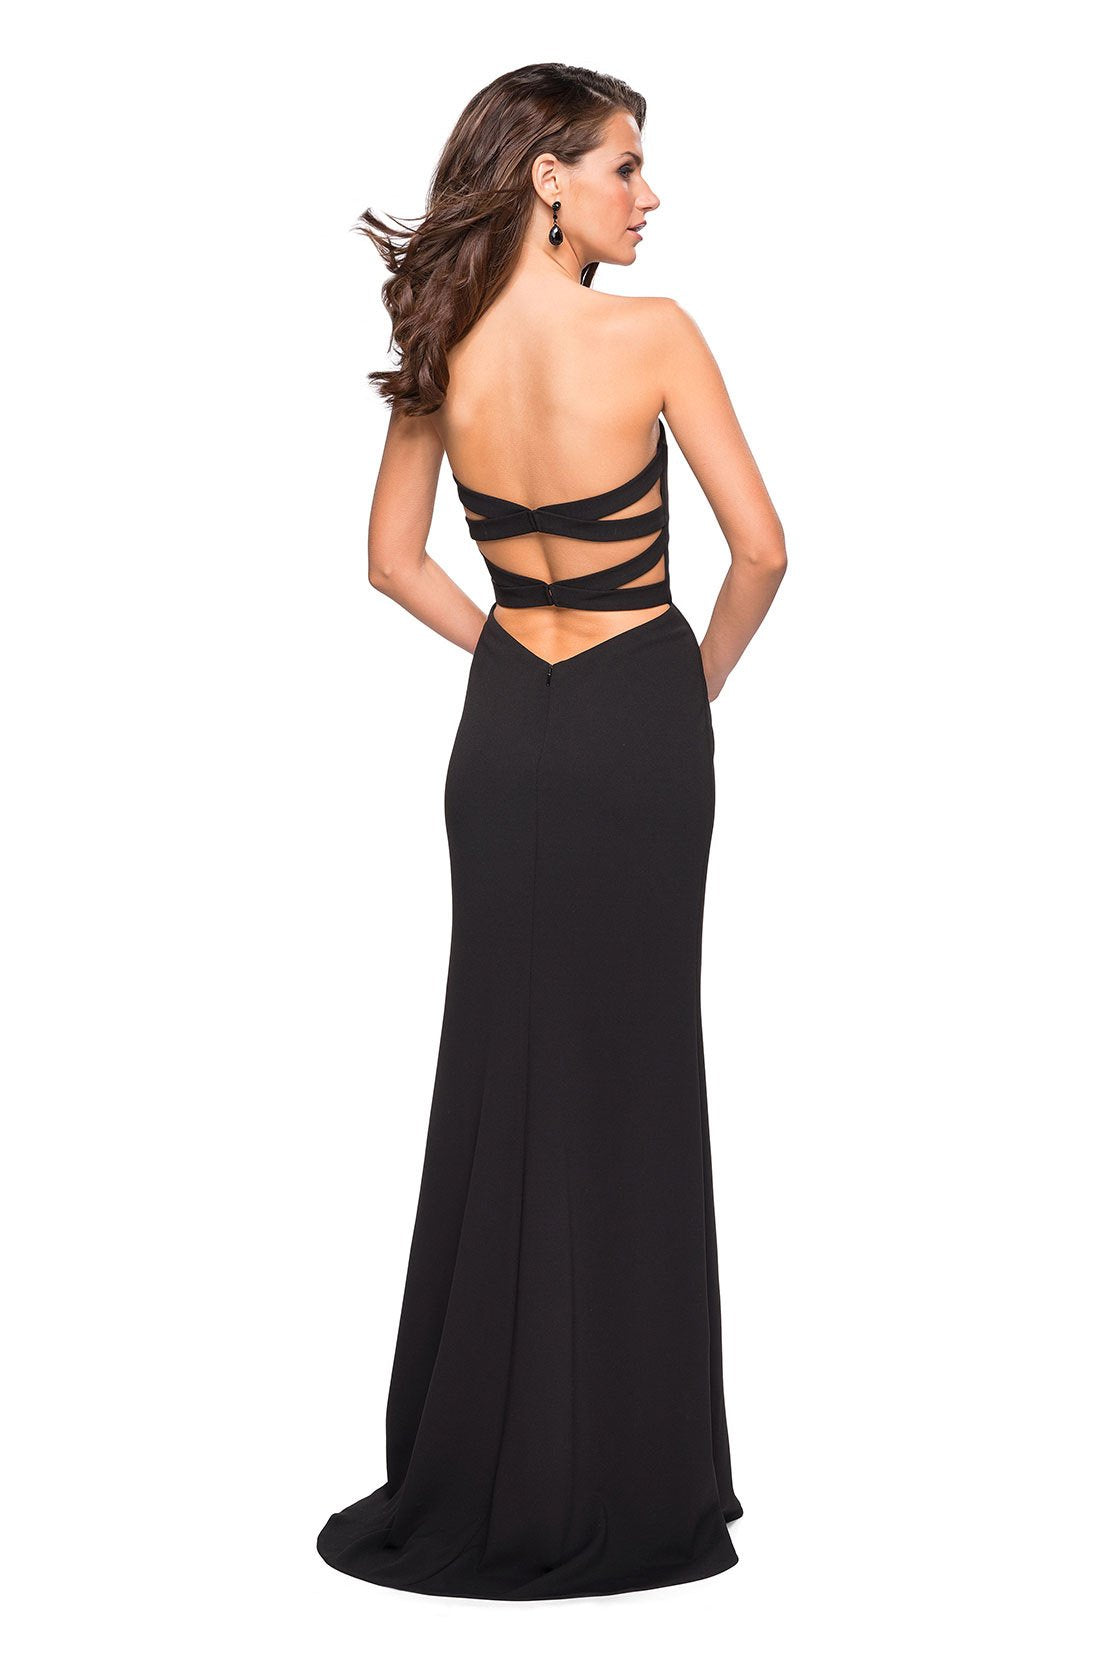 La Femme - Strapless Jersey Sheath Dress With Slit 27035 - 1 pc Black In Size 6 Available